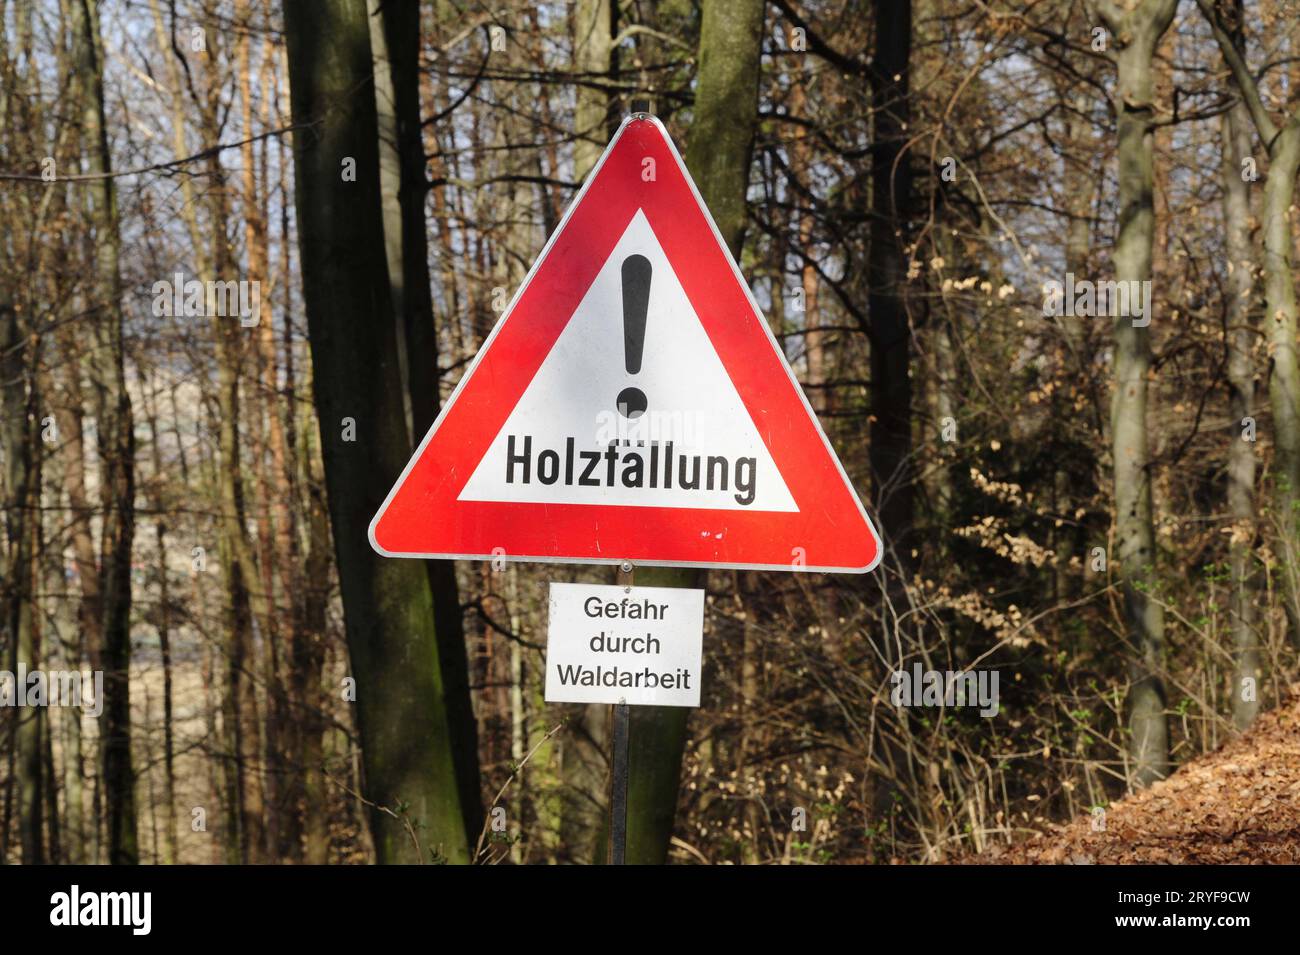 Restricted area sign during woodcutting and logging Stock Photo